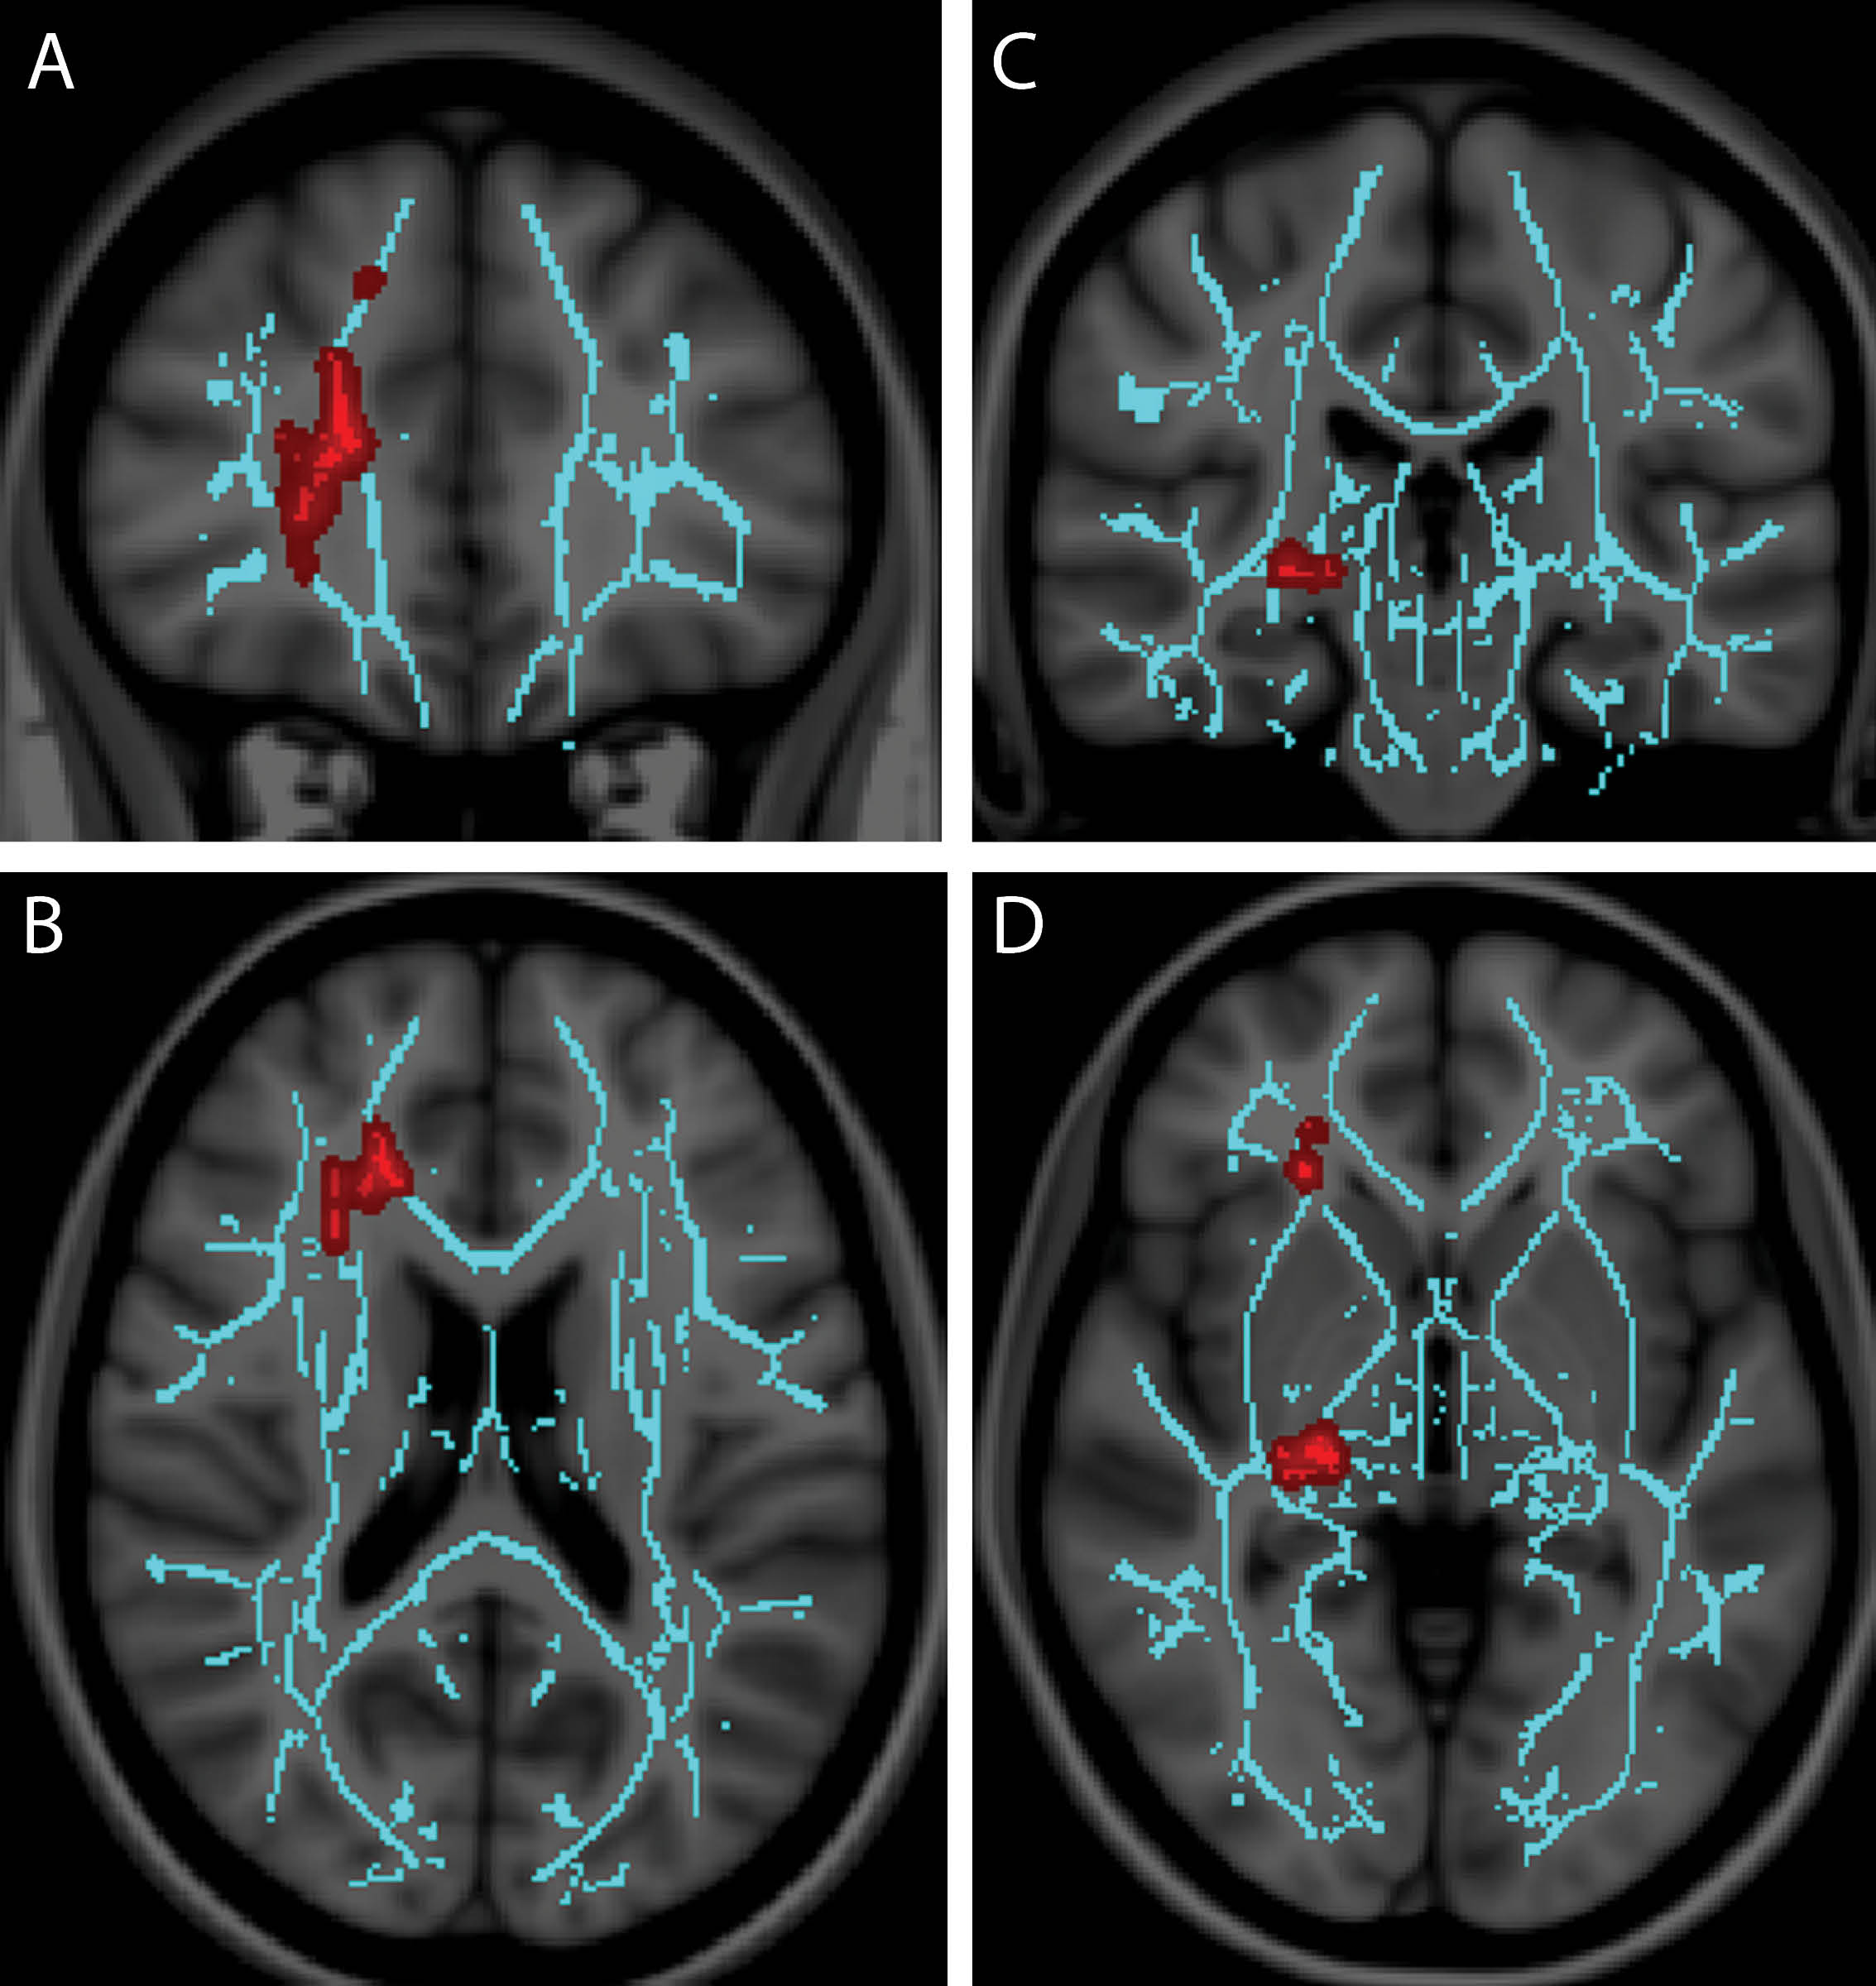 Recent research in Radiology suggests a role for diffusion tensor imaging (DTI) in mild traumatic brain injury (mTBI) diagnosis